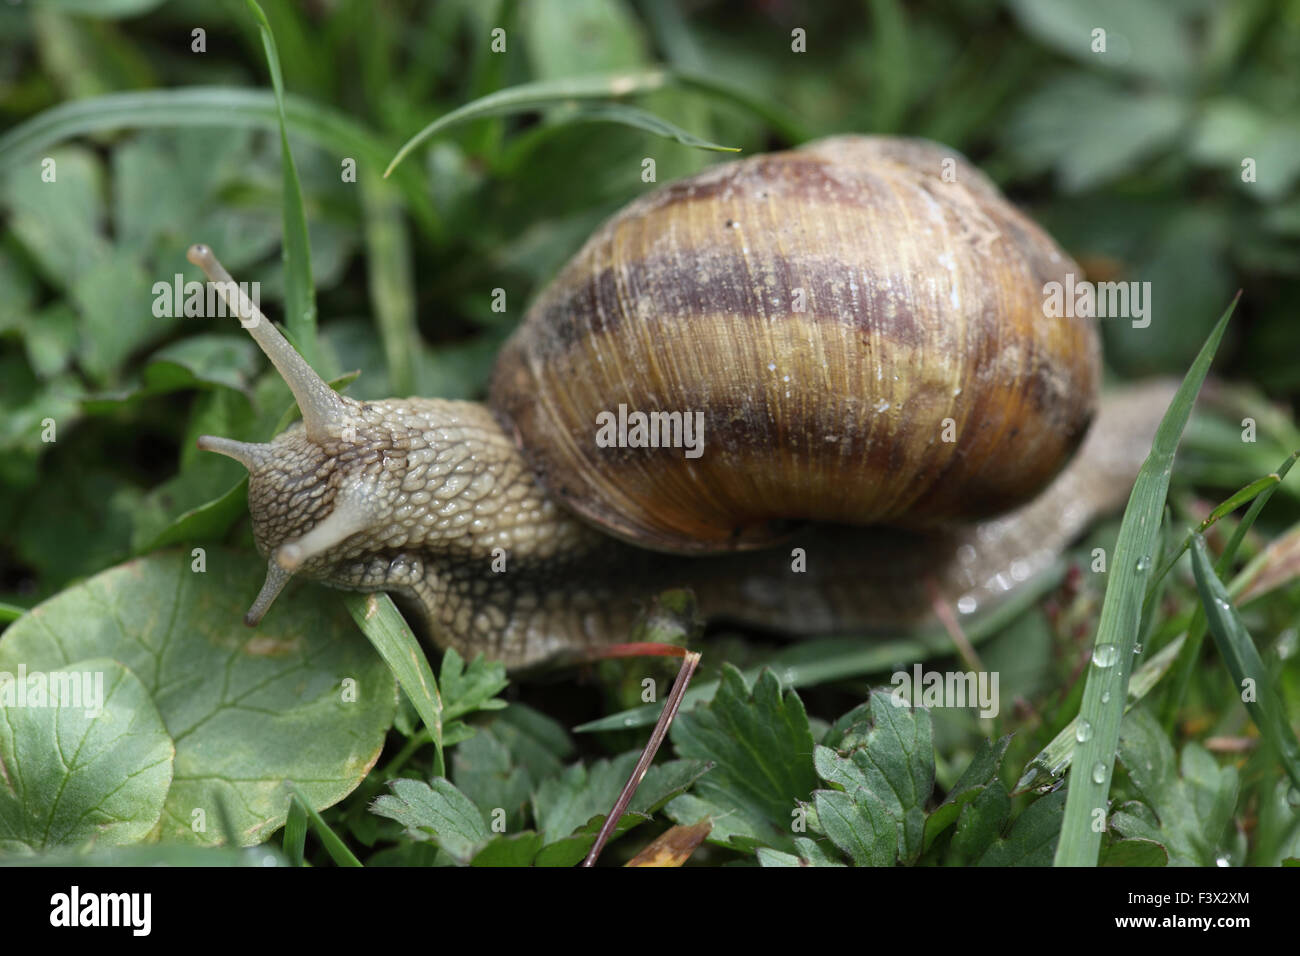 Moving through wet grass side view Hungary May 2015 Stock Photo